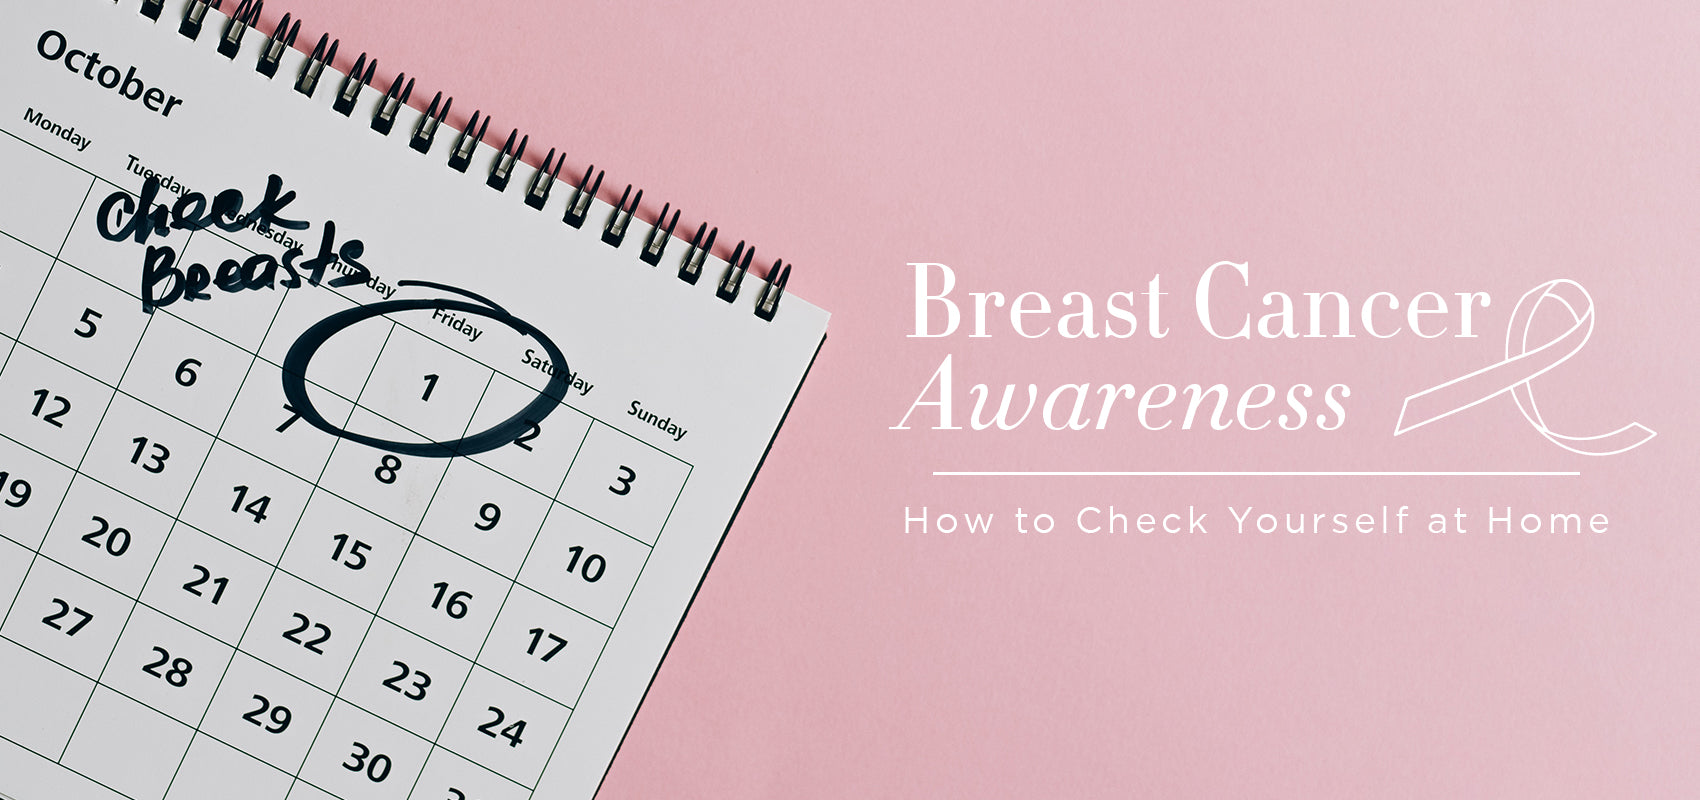 Breast Cancer Awareness: How to Check Yourself at Home